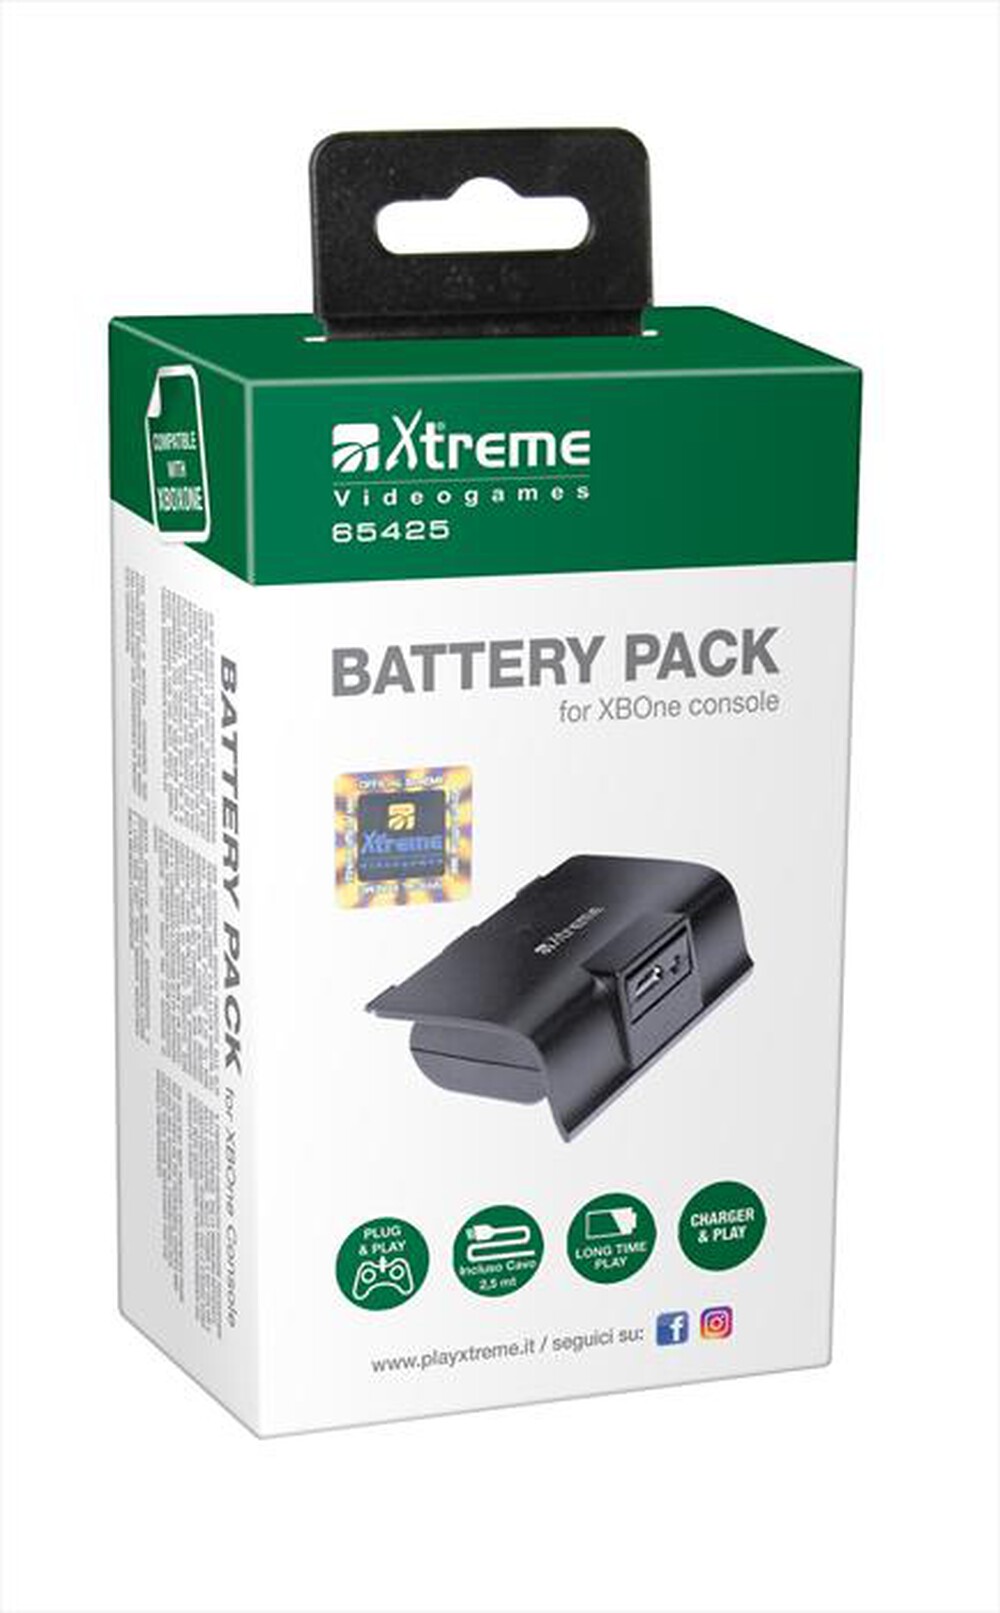 "XTREME - 65425 - Xbox One Battery Pack + Power Cable - "